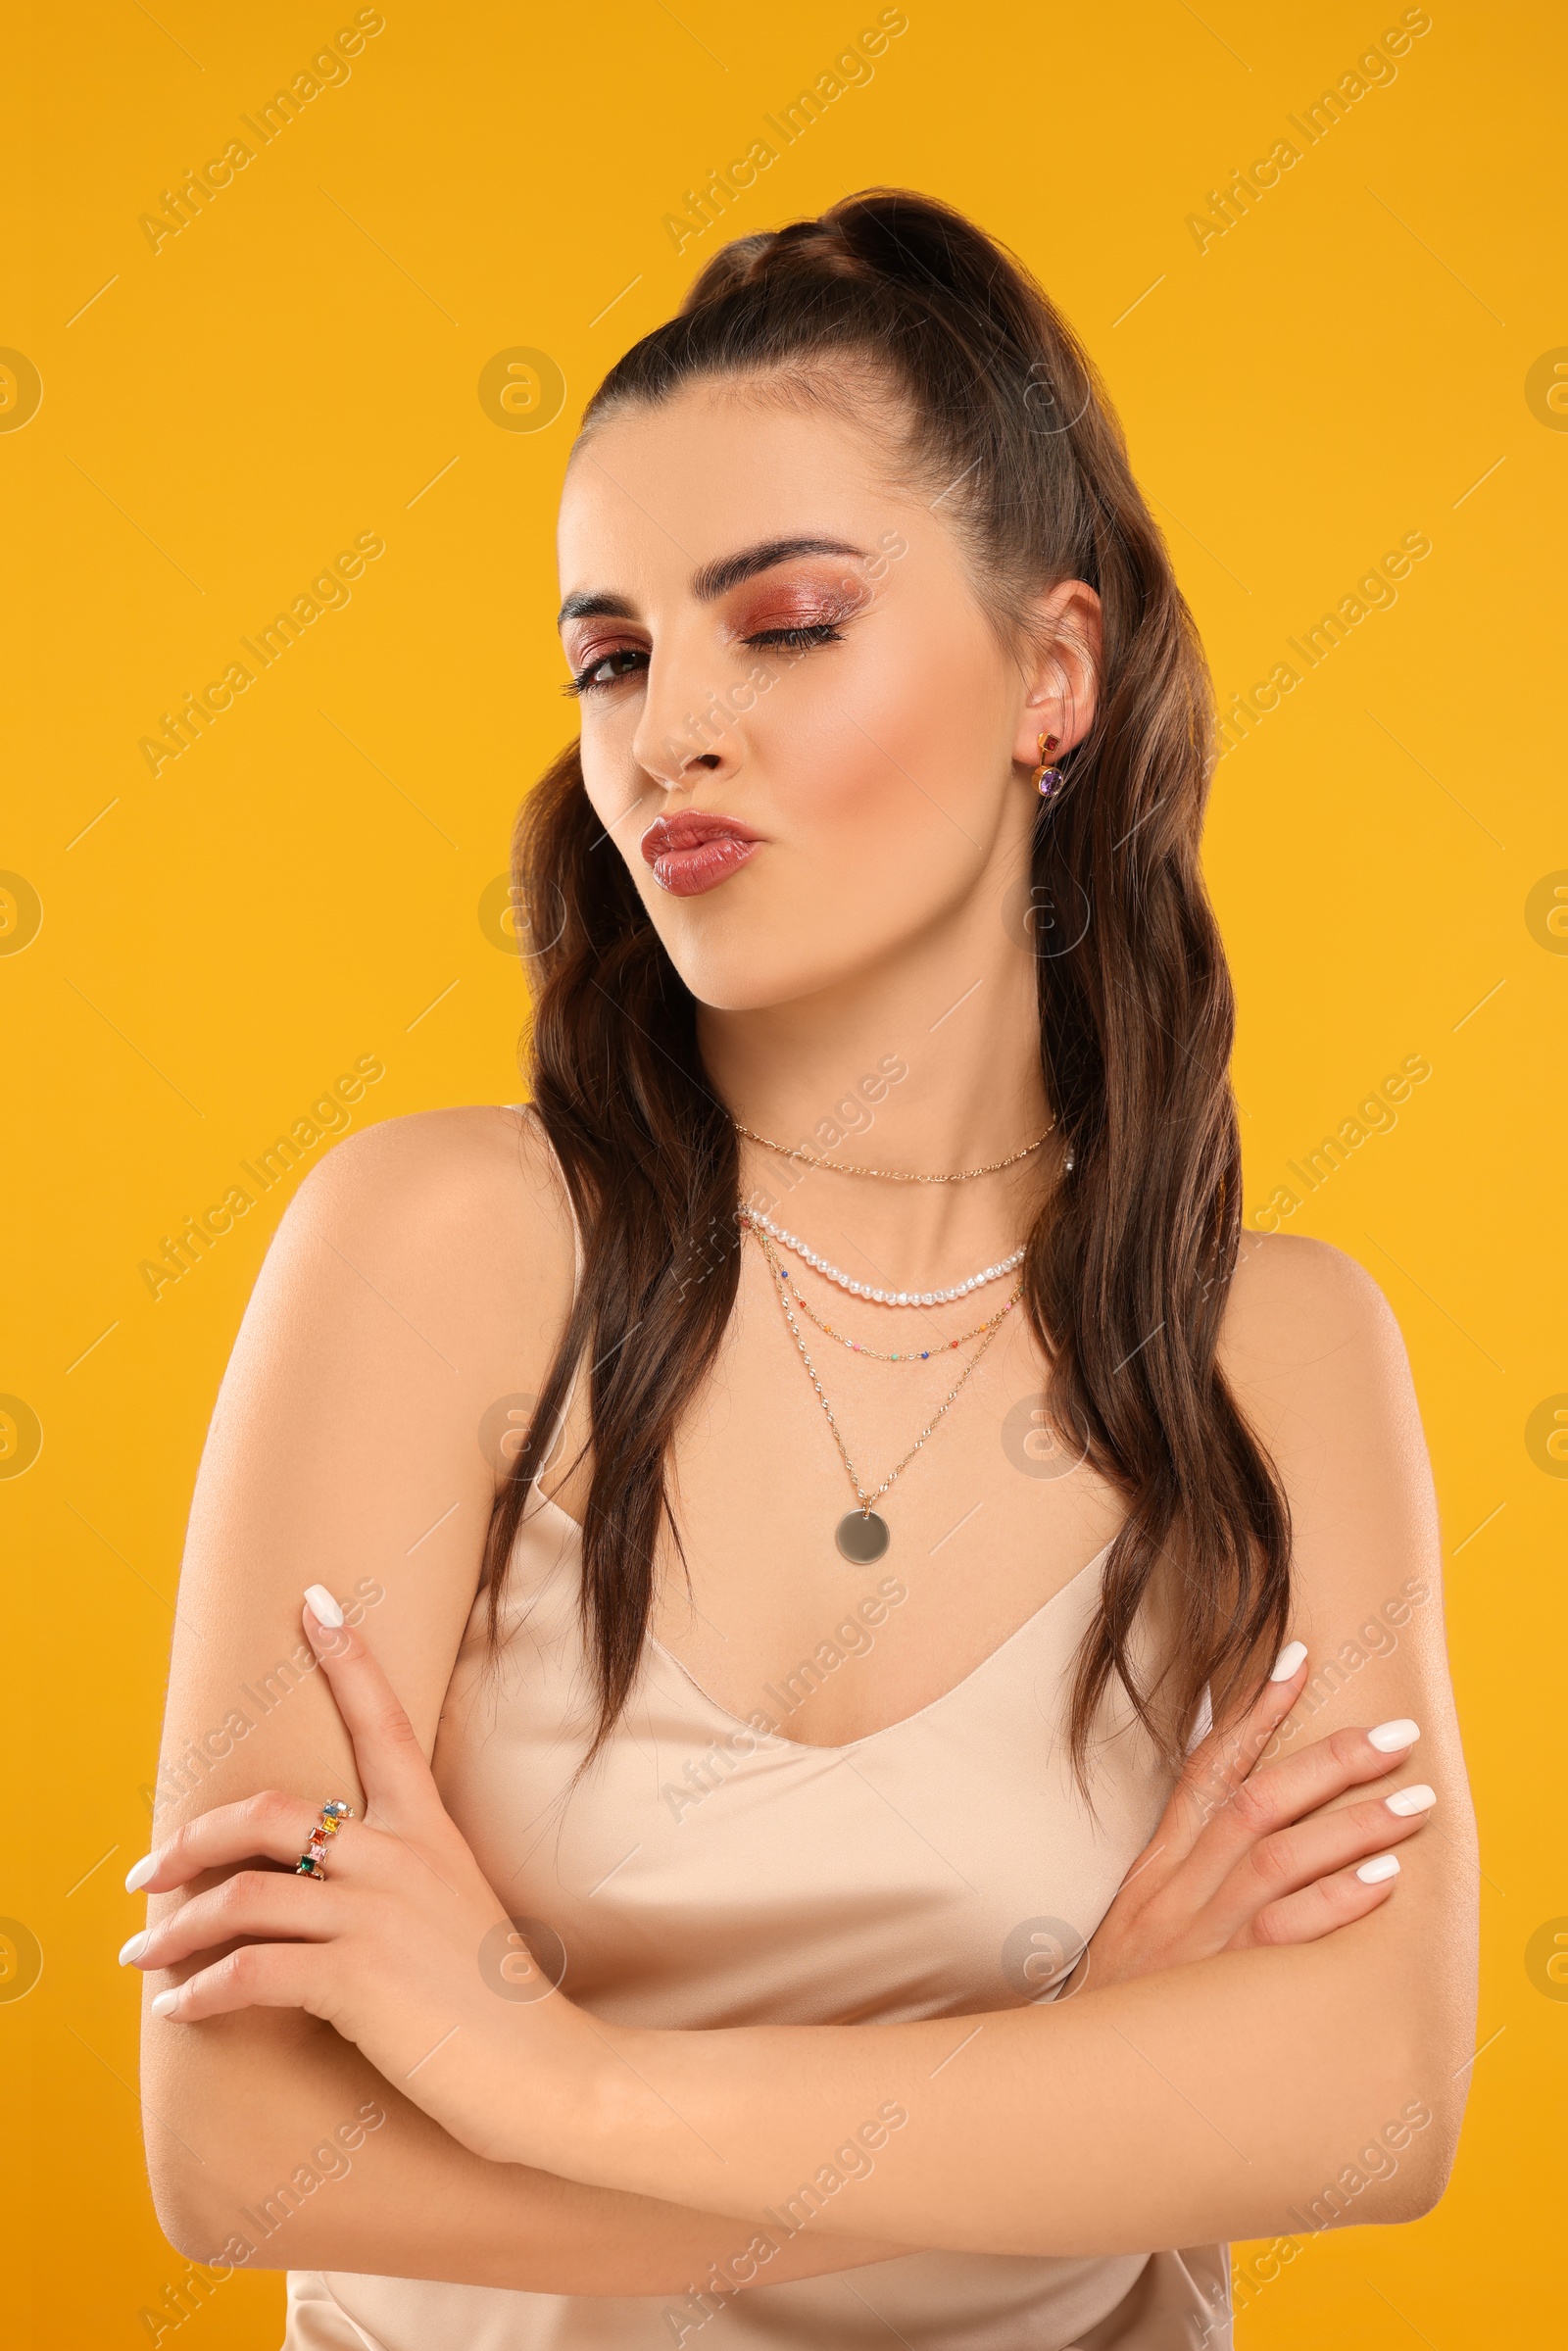 Photo of Beautiful woman with elegant jewelry blowing kiss on orange background